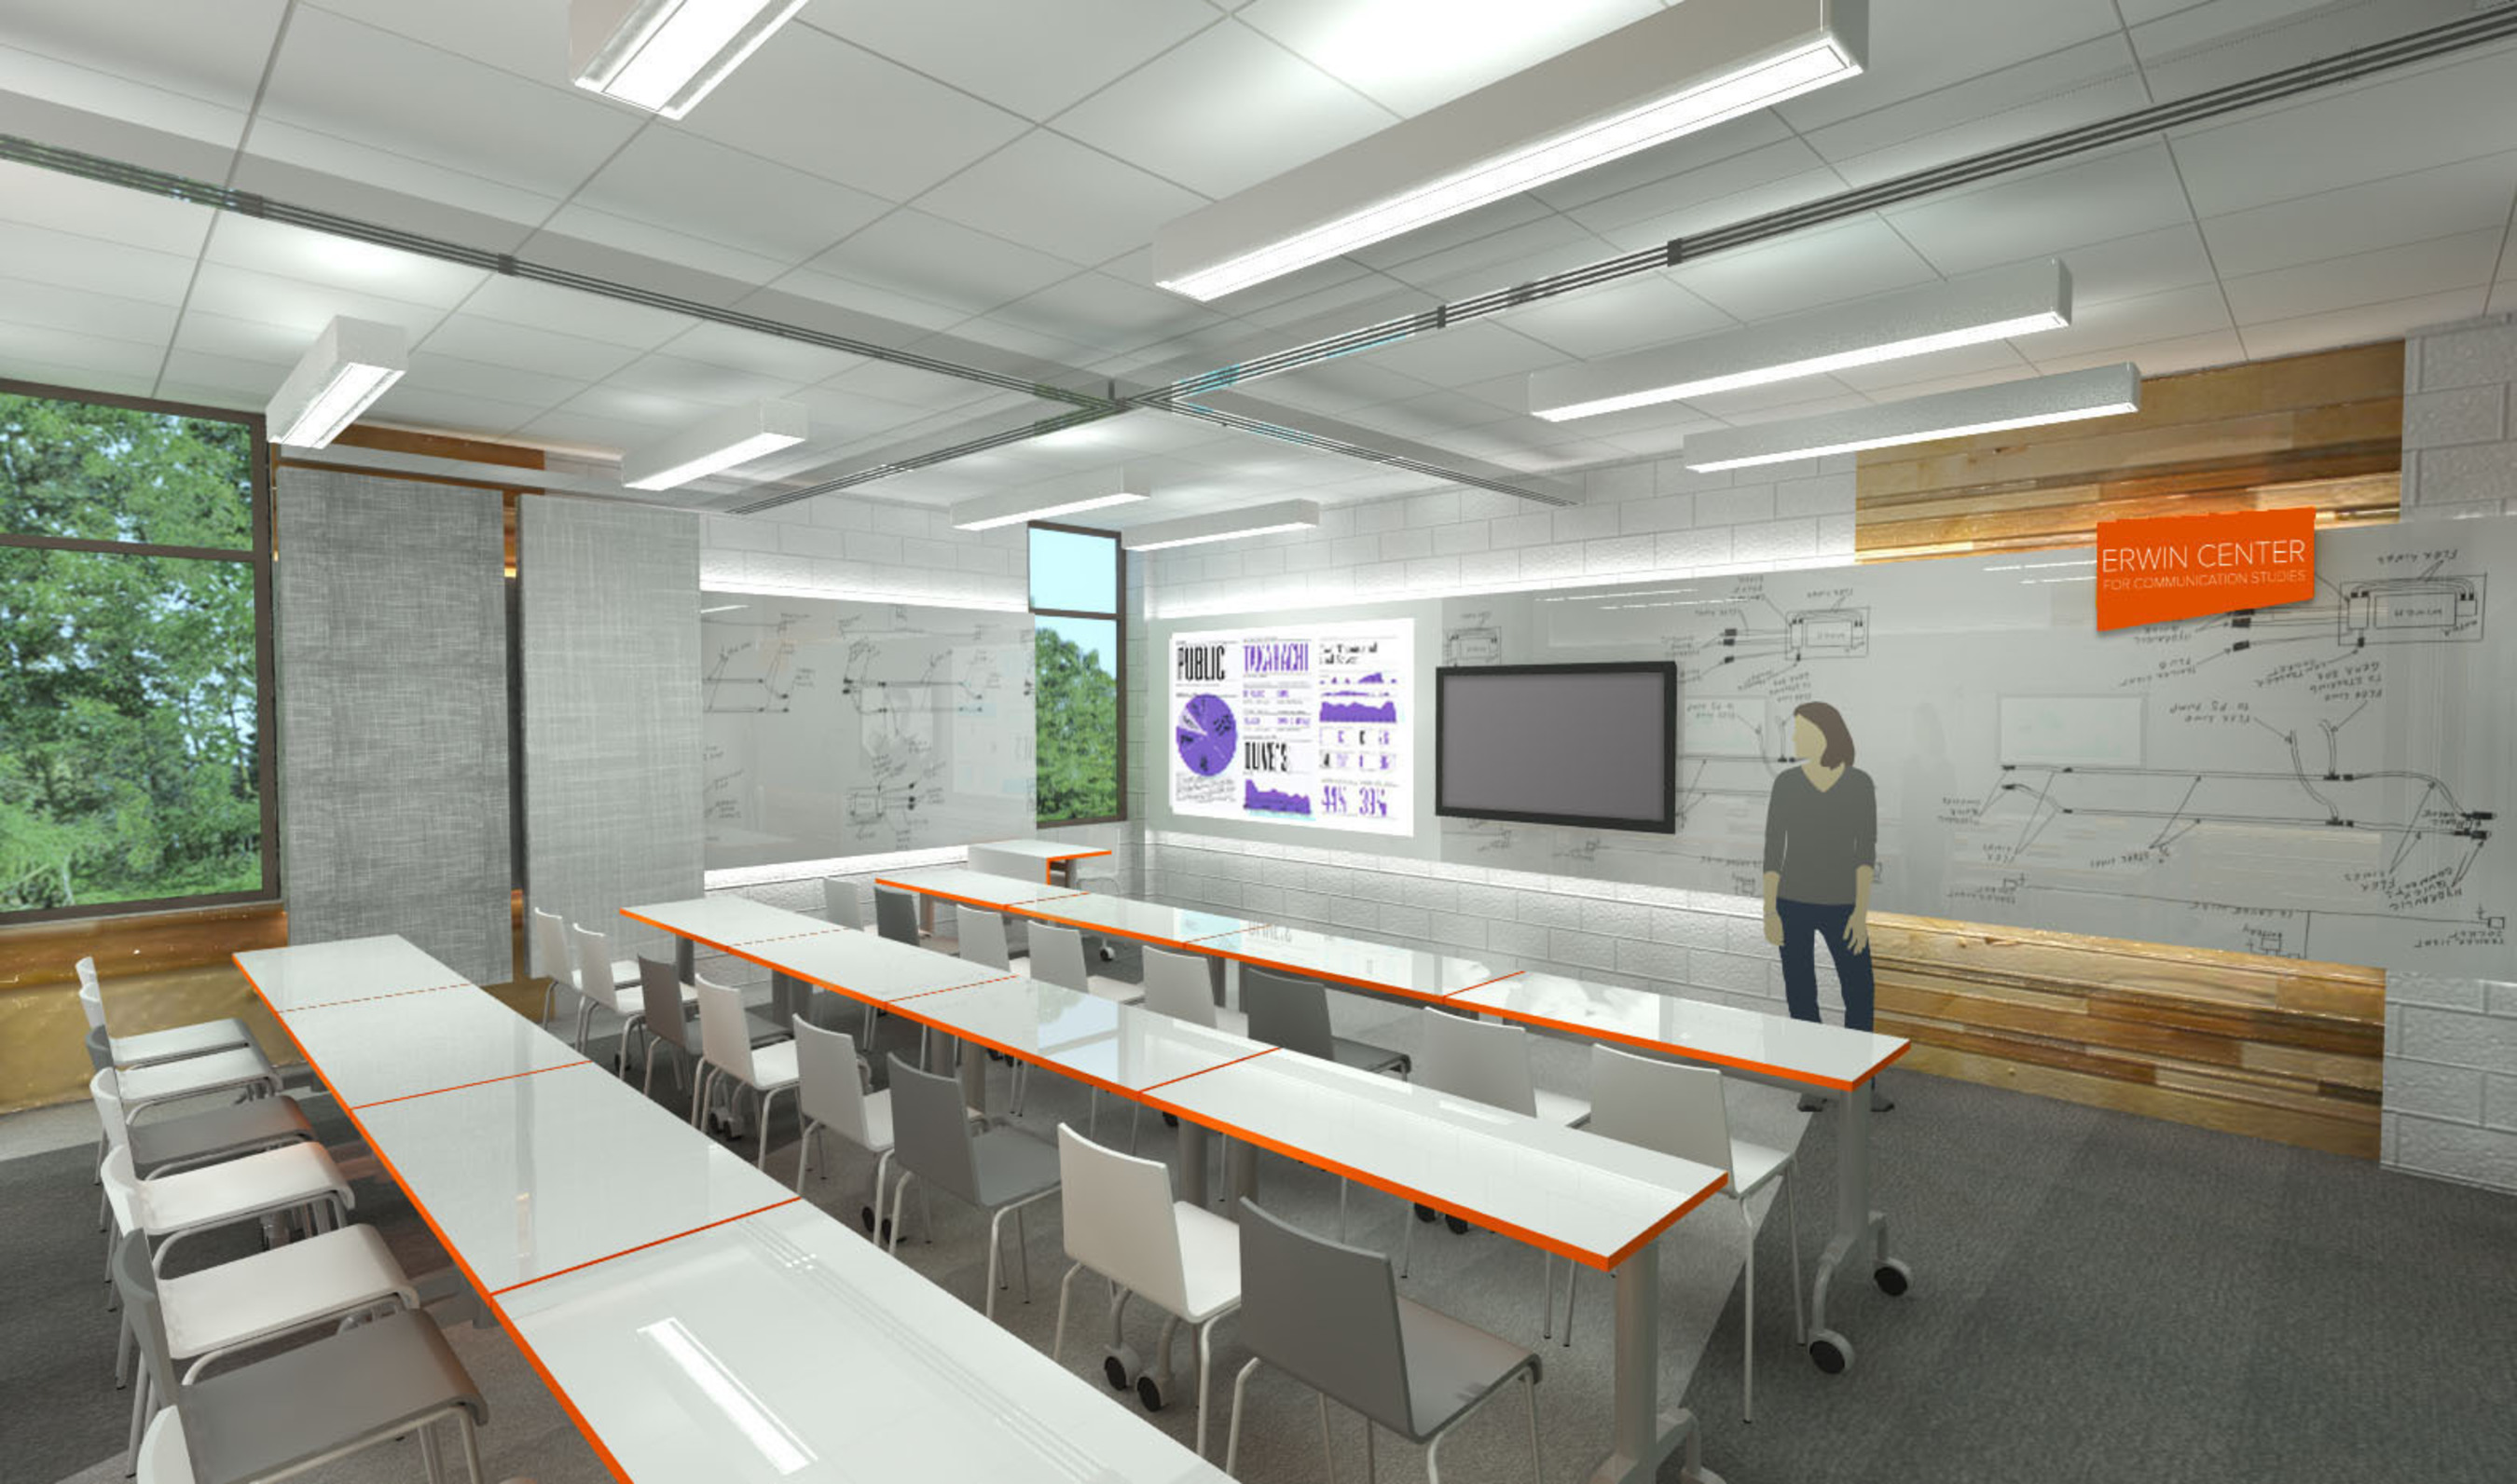 Rendering of new classroom space showcases the latest technology, including video-conferencing capability so students can communicate with industry professionals. (PRNewsFoto/Erwin Penland)